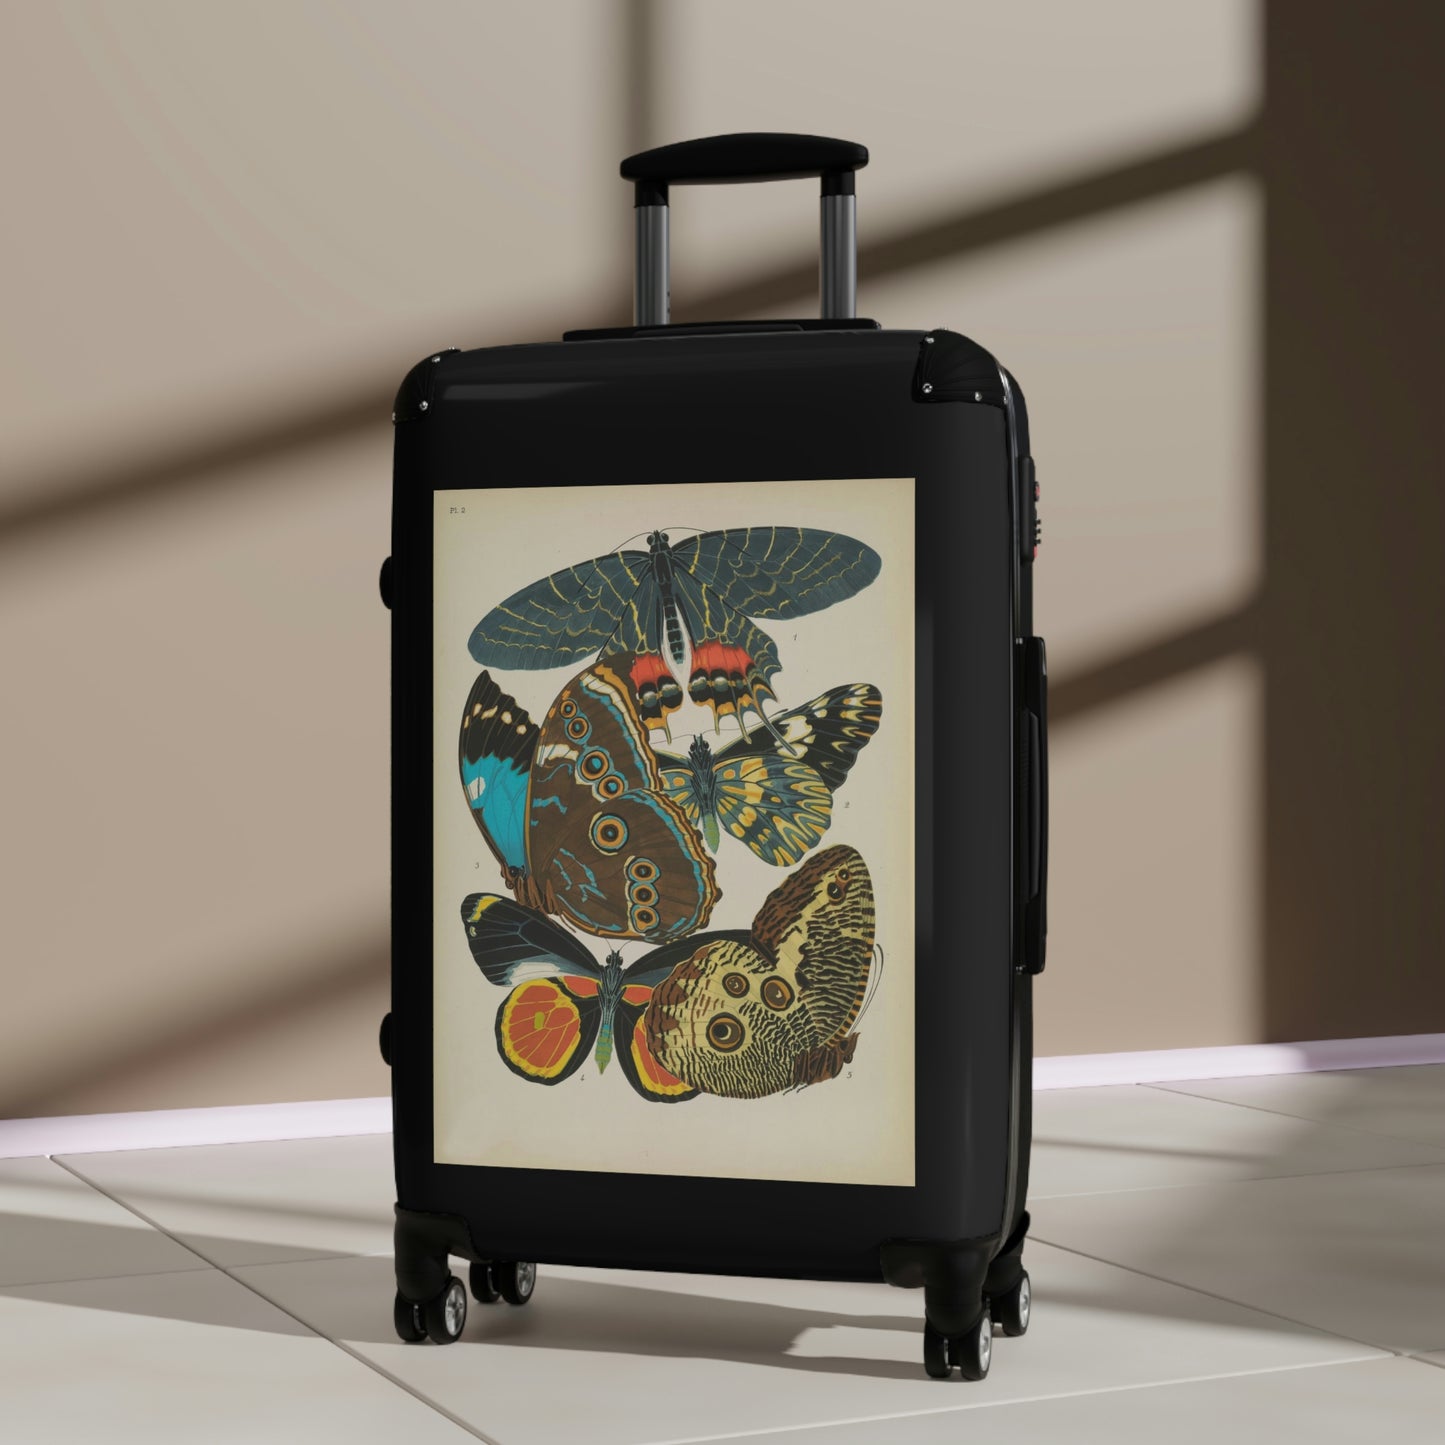 Getrott Butterflies Macrolepidopteran Rhopalocera Lepidoptera Multiple Colors Cabin Suitcase Rolling Luggage Inner Pockets Extended Storage Adjustable Telescopic Handle Inner Pockets Double wheeled Polycarbonate Hard-shell Built-in Lock